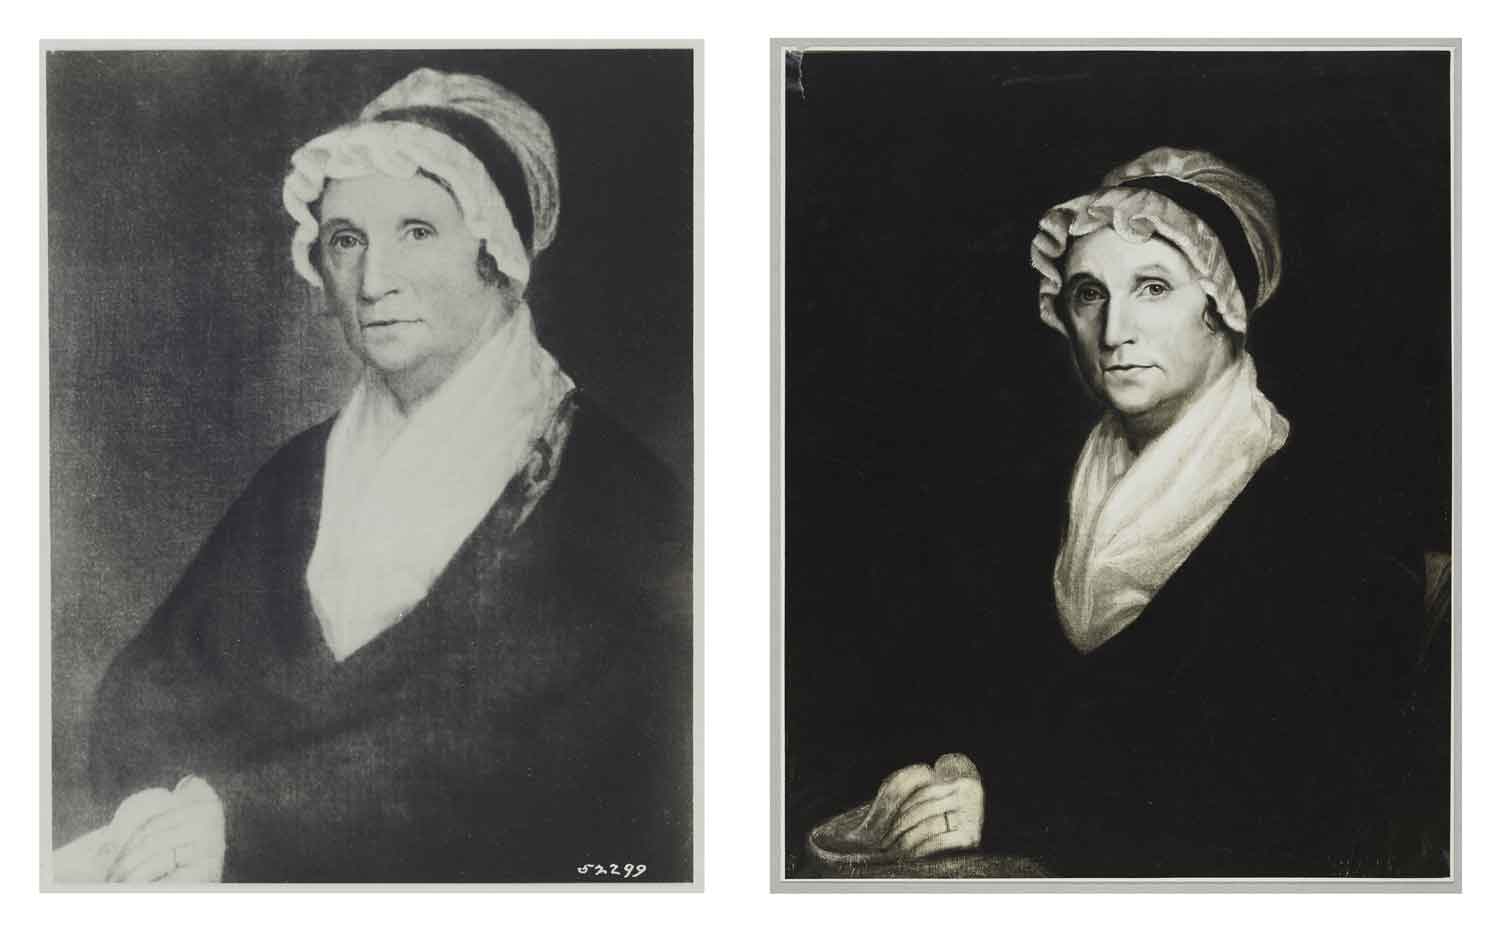 Two reproductions of the same half-length portrait of an older woman dressed in a white shawl and bonnet showing the work before and after restoration.